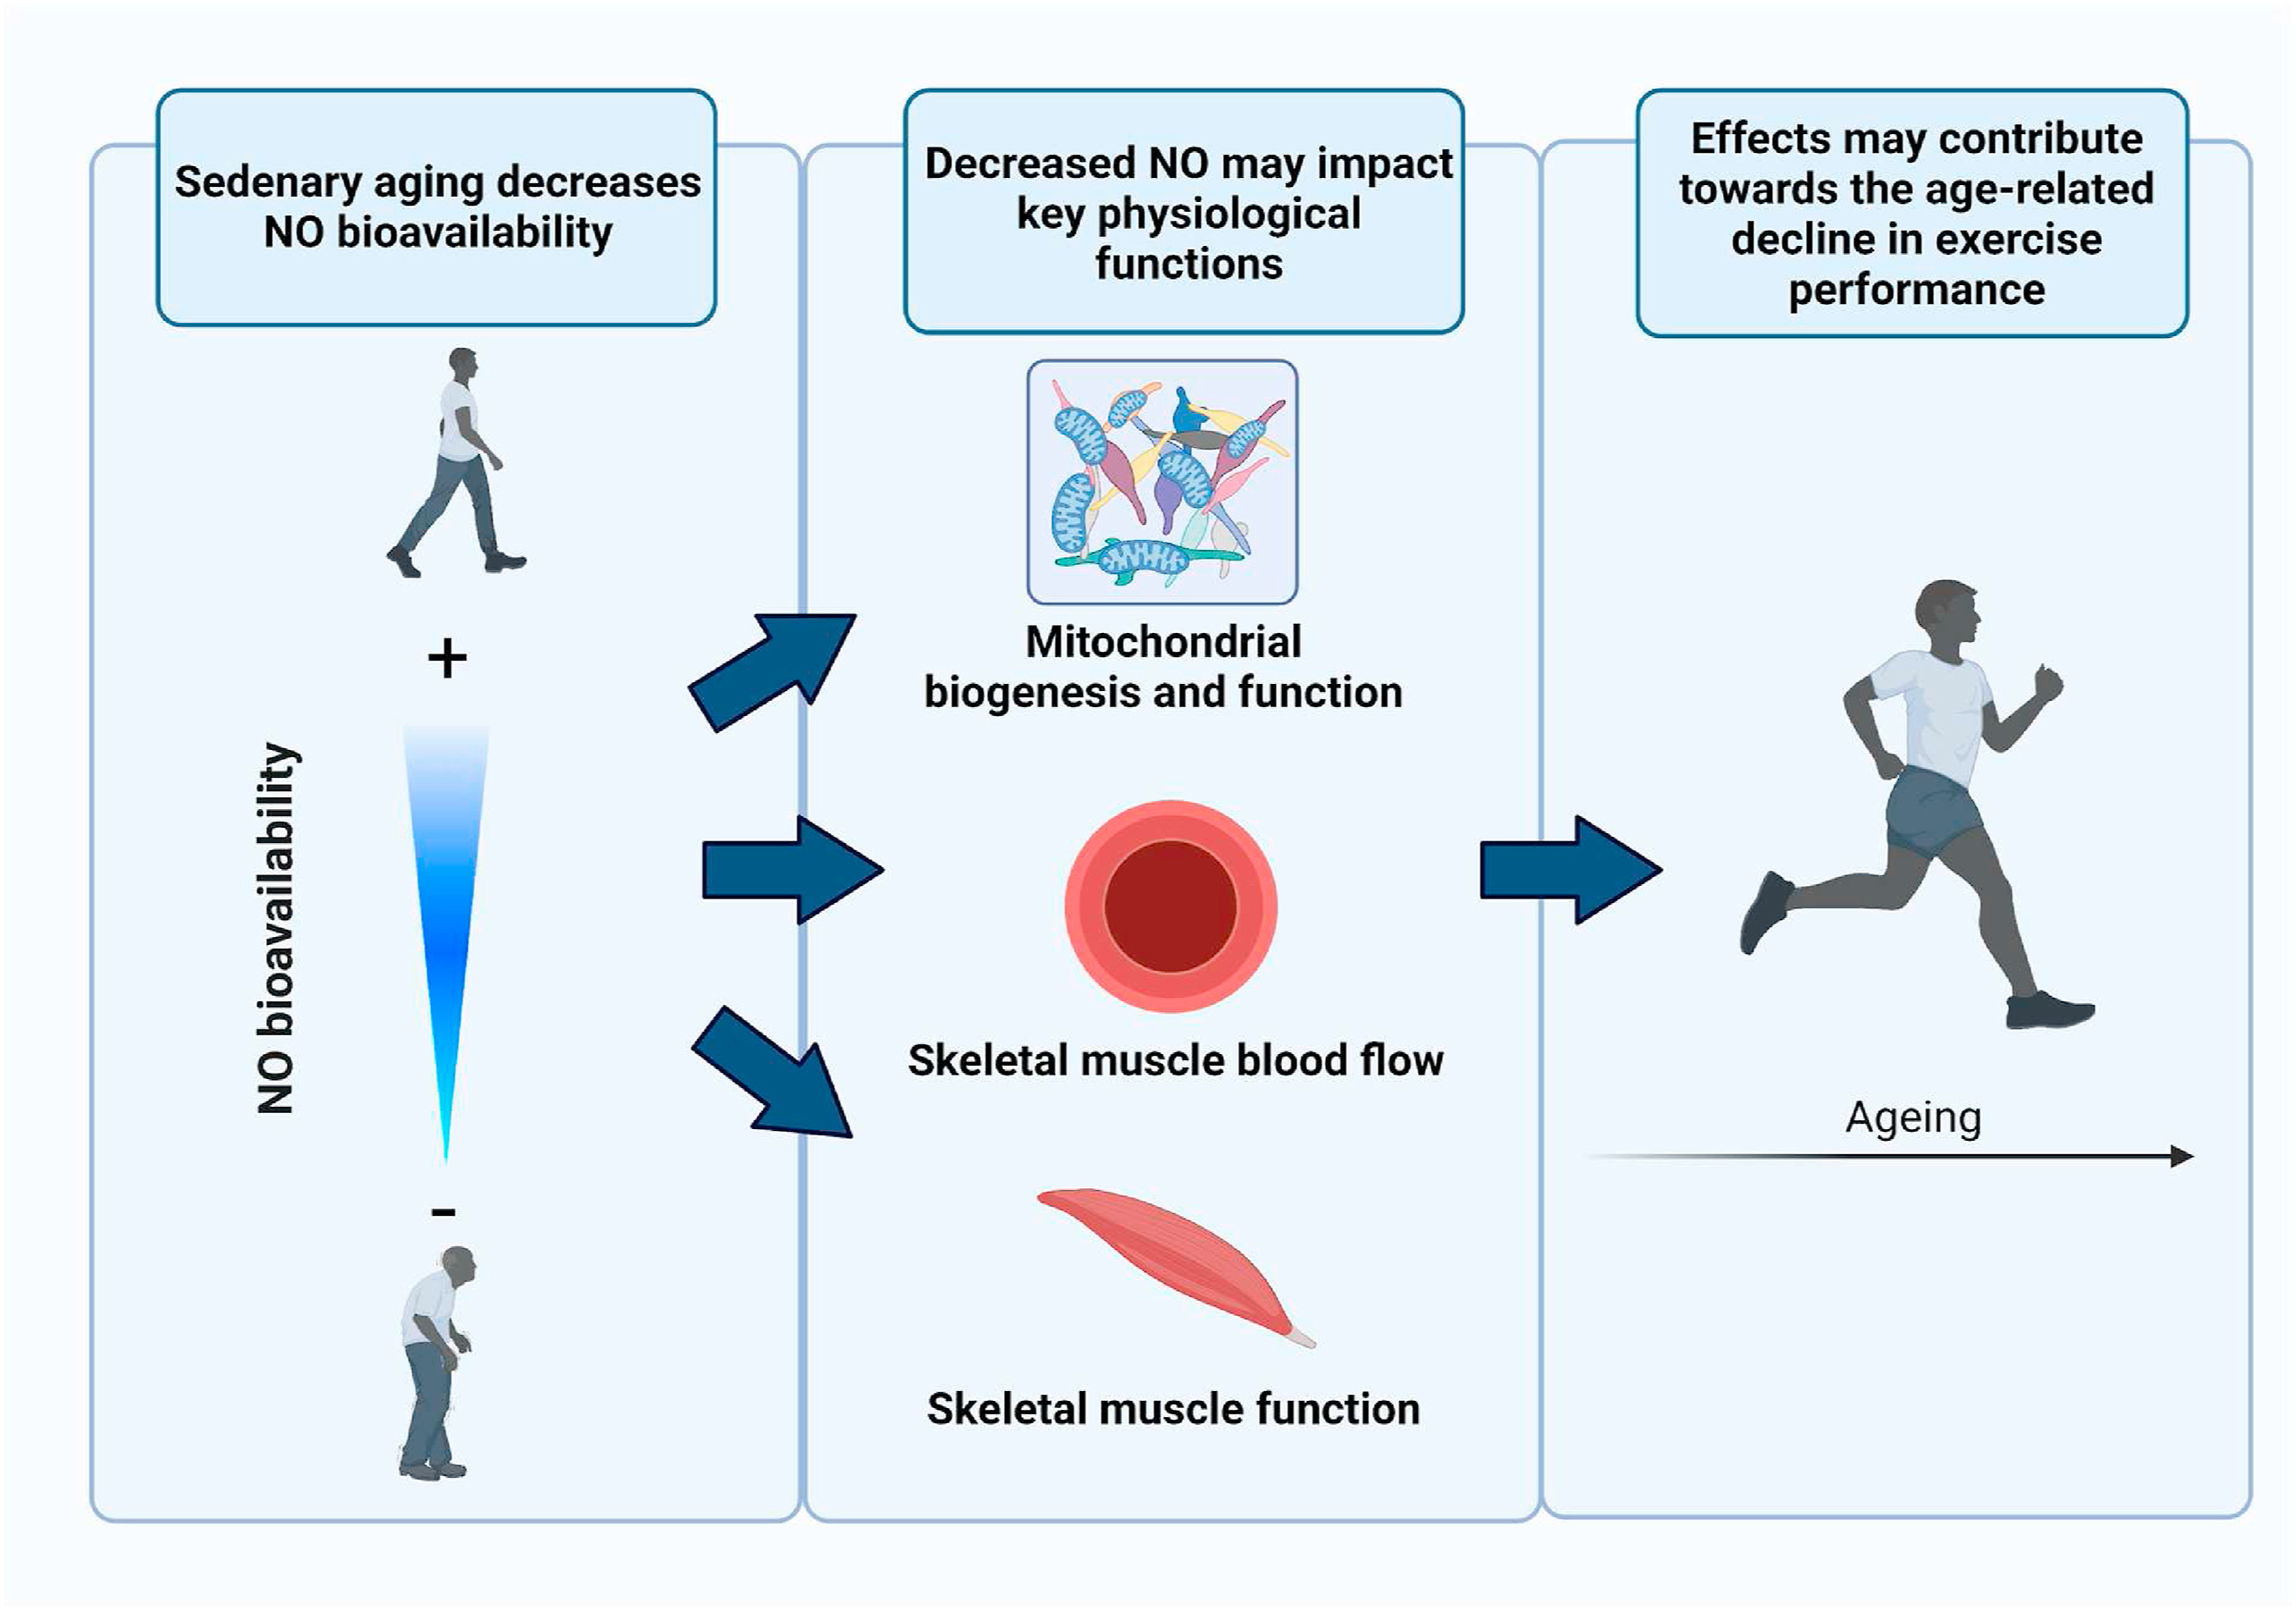 Effects of aging on nitric oxide bioavailability, physiological function, and exercise performance.